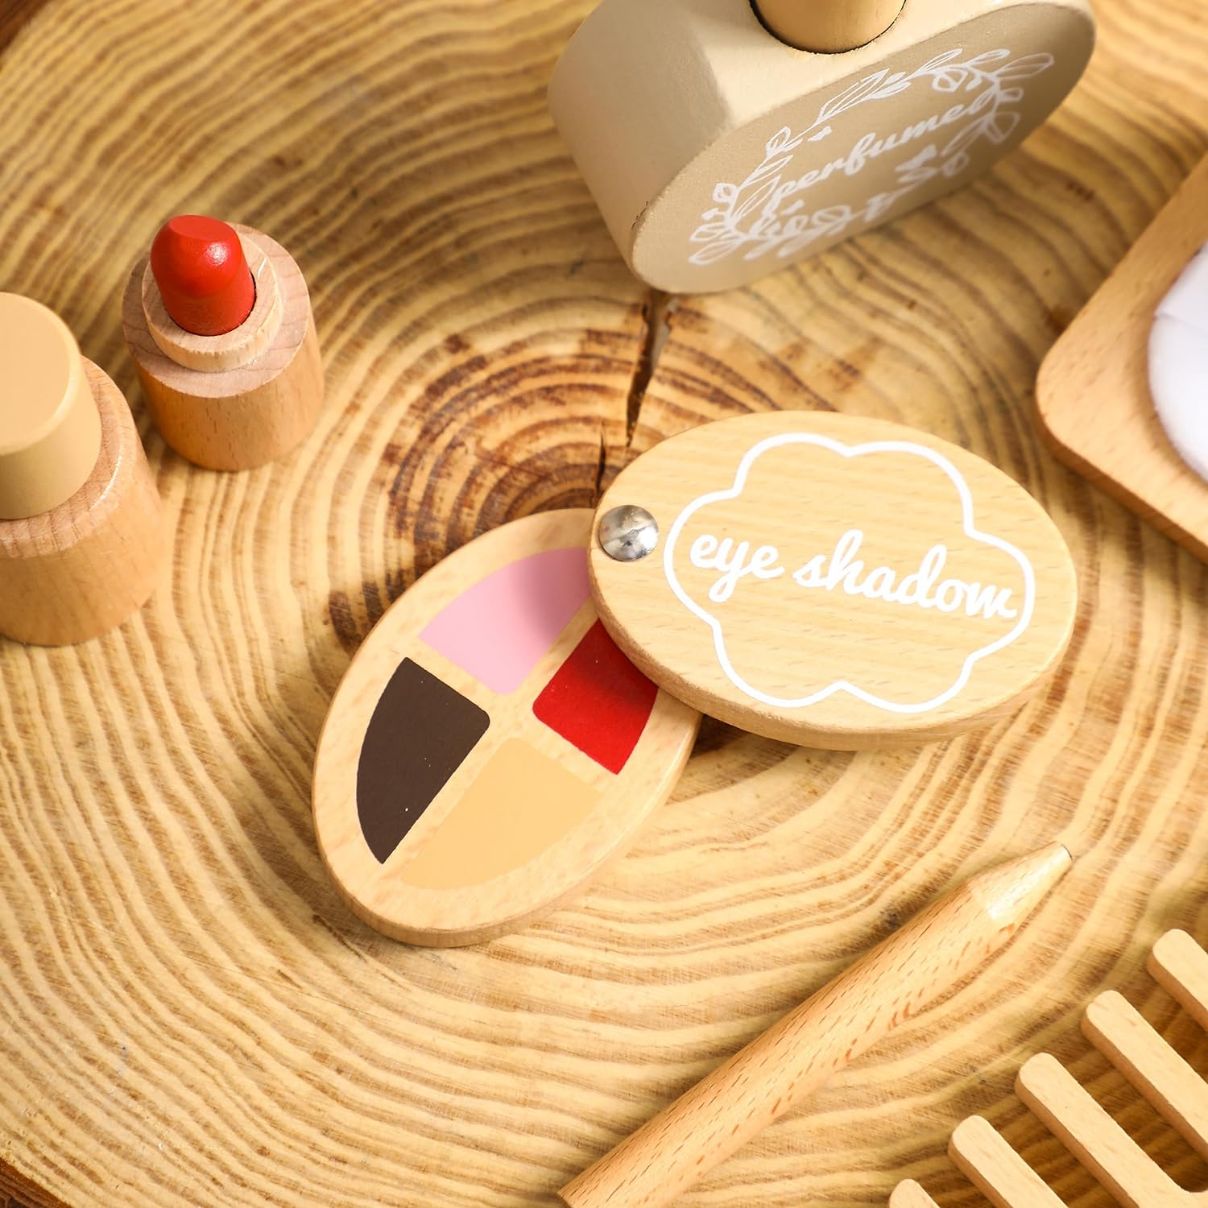 Wooden Make Up Pretend Play Set Perfect Gift Set for Girls